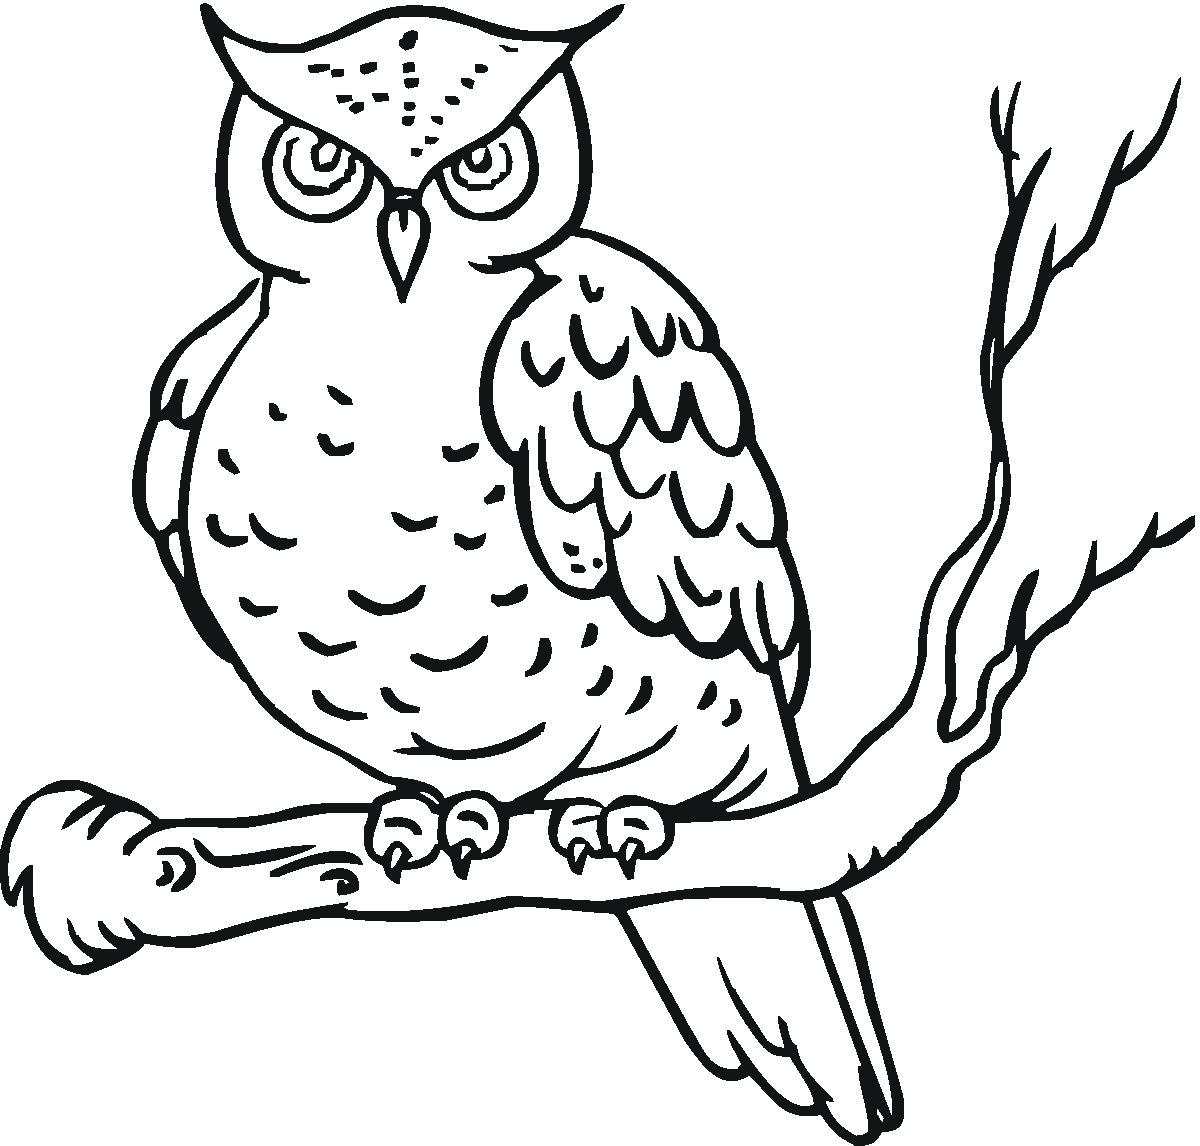 Owl coloring pages, Coloring pages and Owl